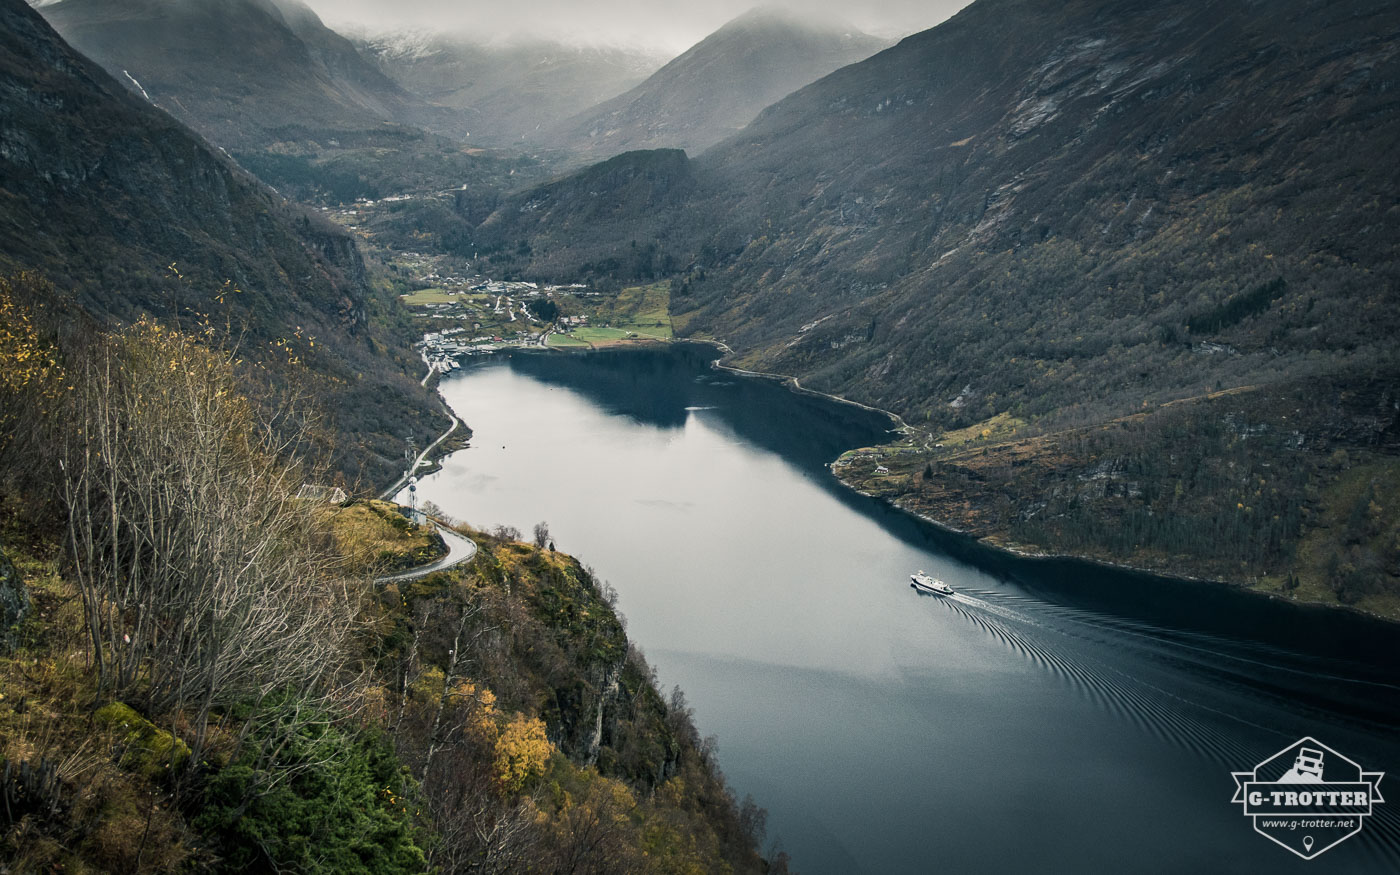 At the end of the fjord lies the small town of Geiranger.